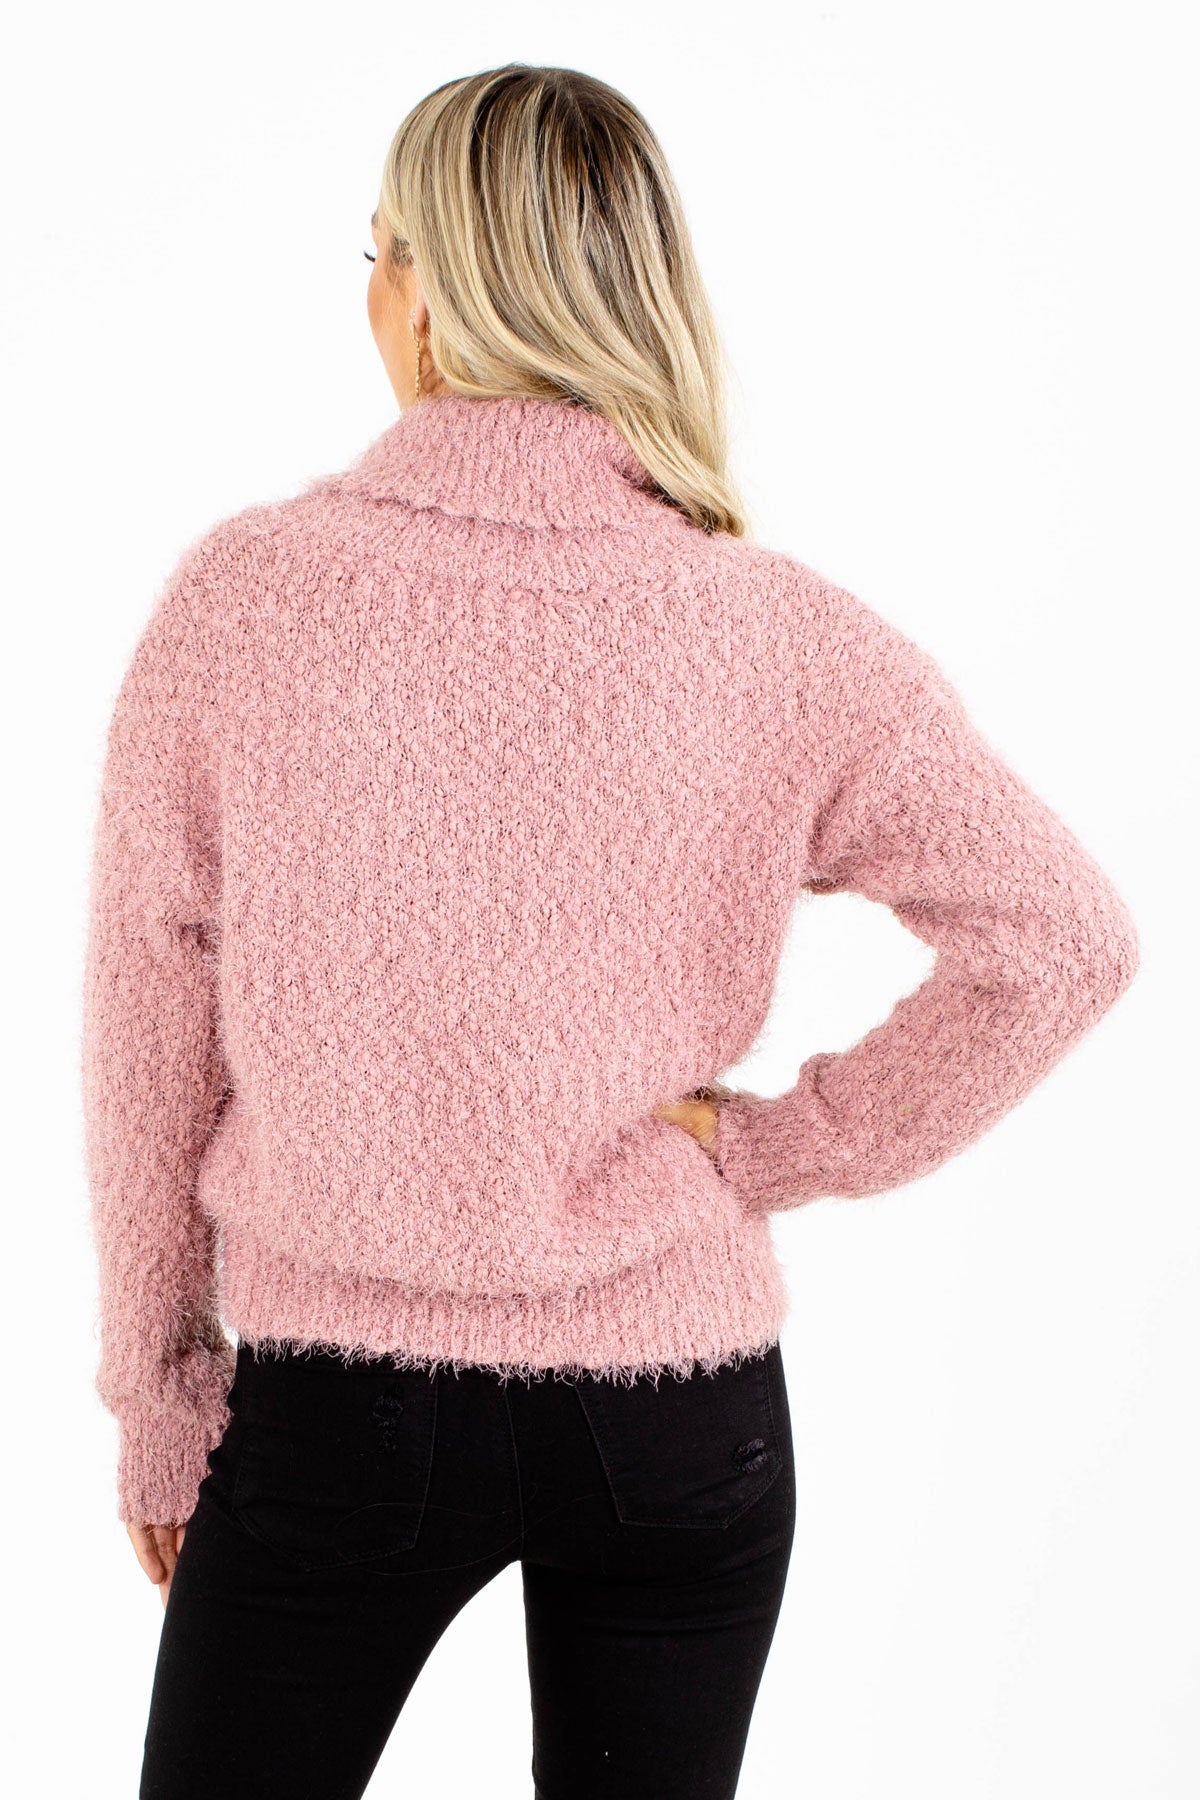 Cute and Comfortable Fall Sweater For Women